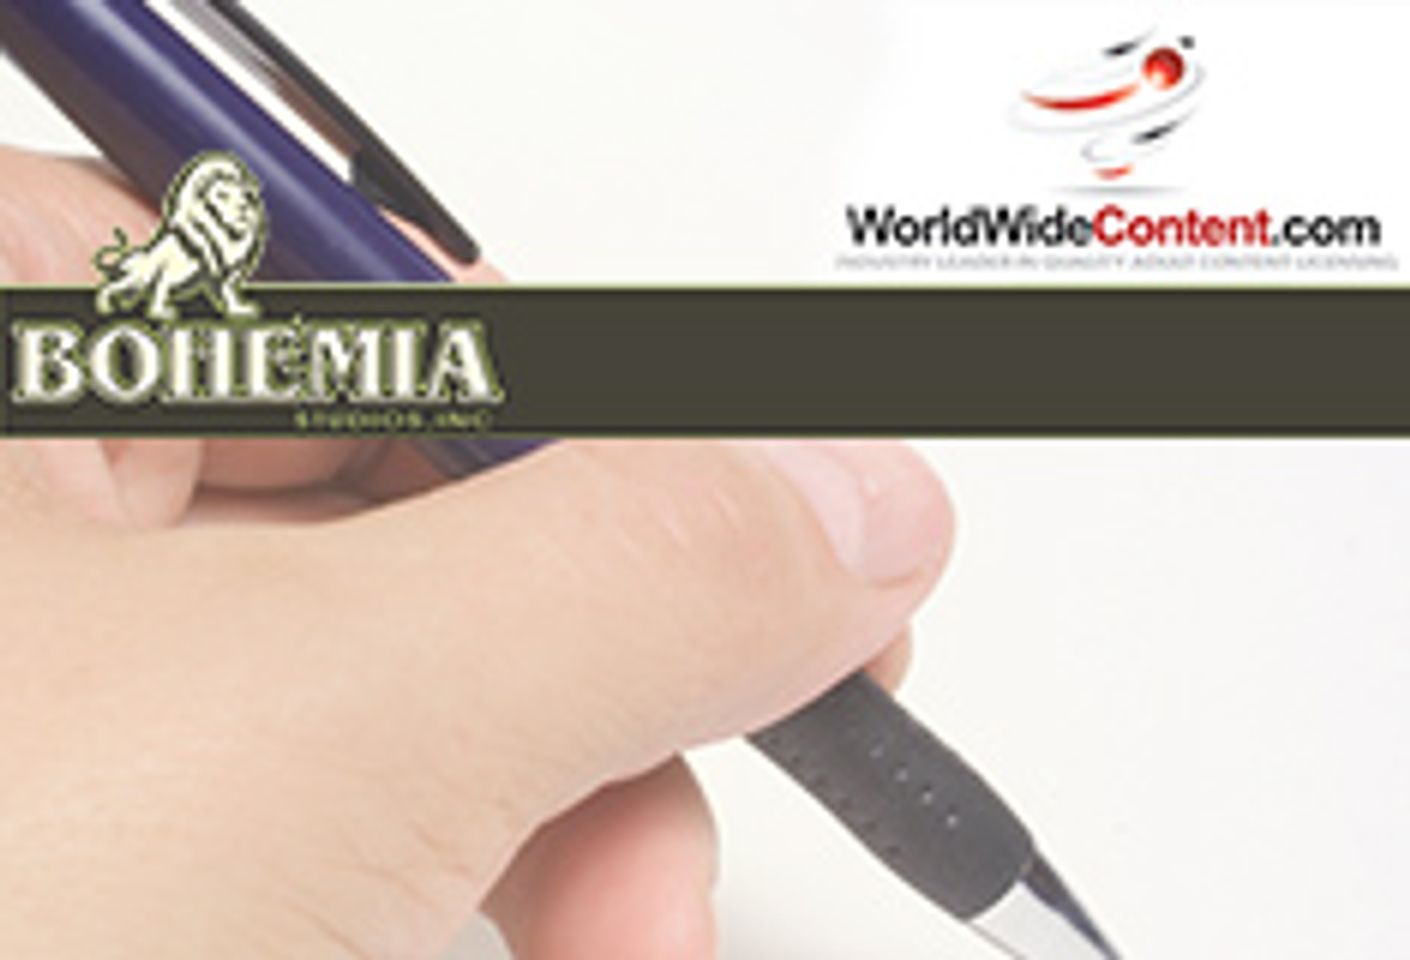 Bohemia Studios, World Wide Content Ink Licensing Deal